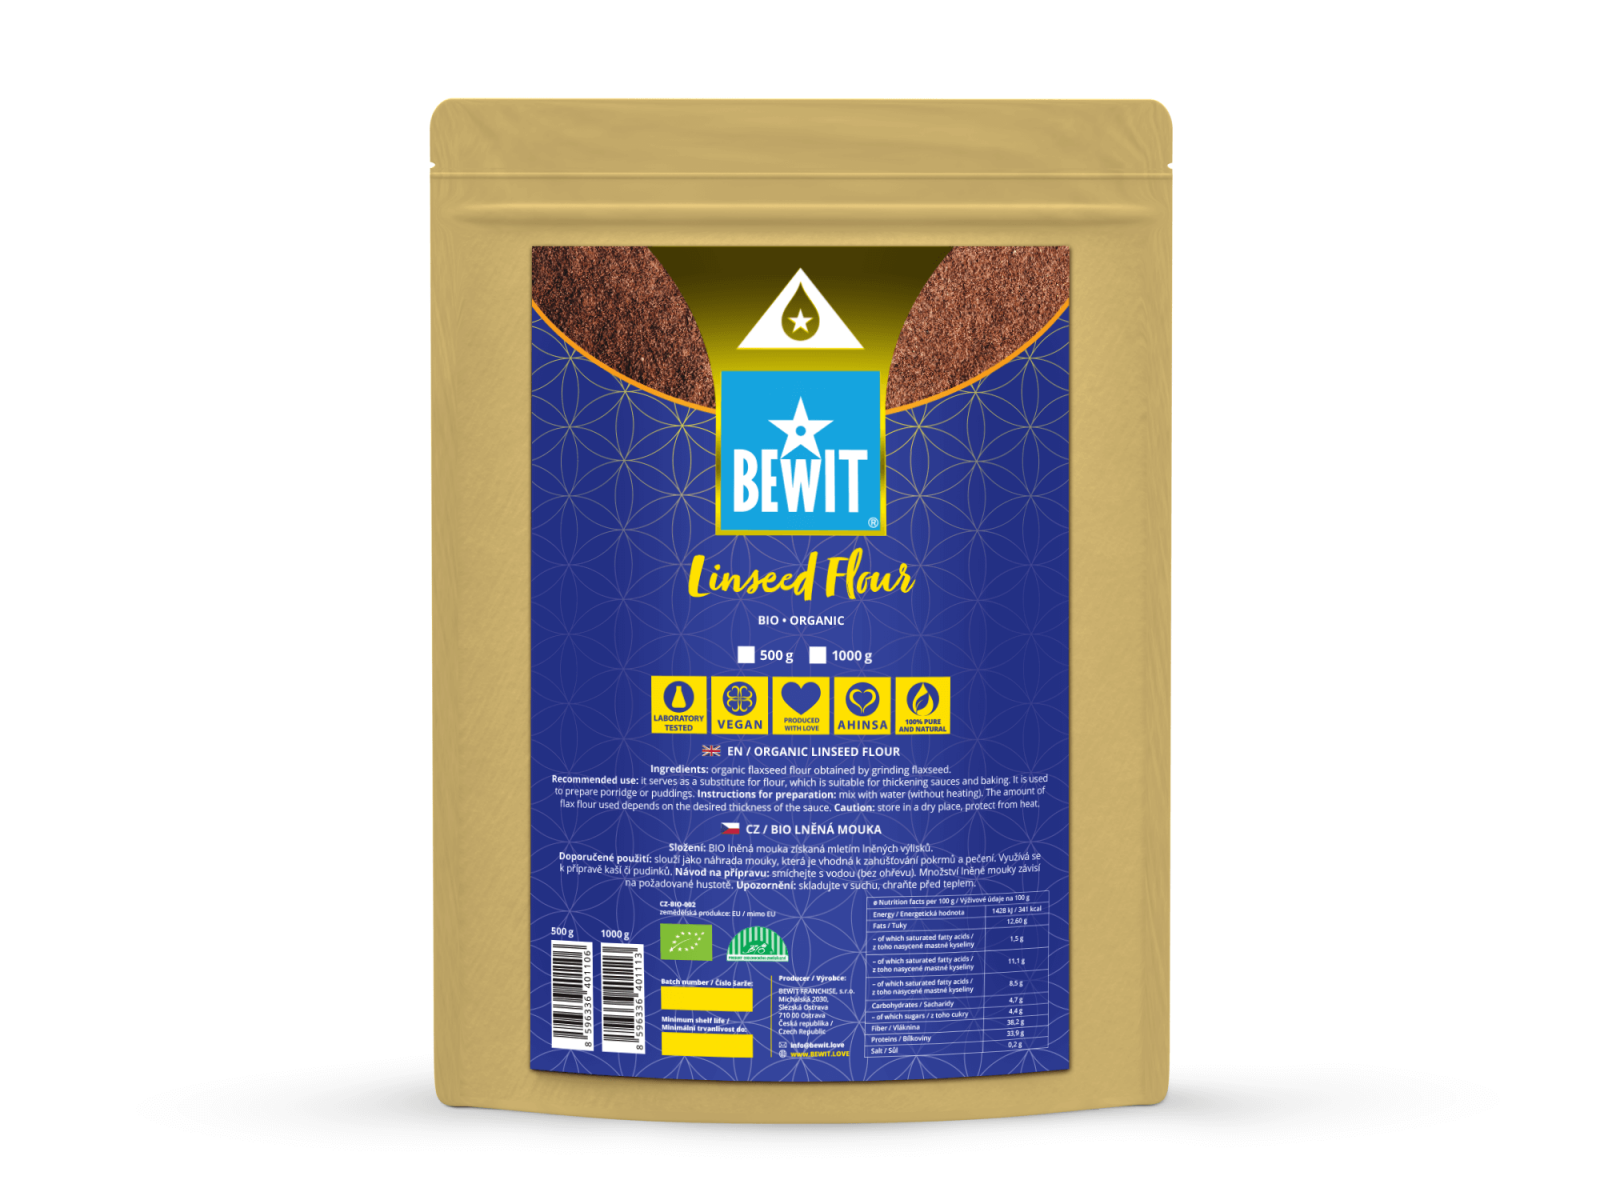 BEWIT ORGANIC LINSEED FLOUR - Organic linseed flour obtained by grinding linseed. - 2